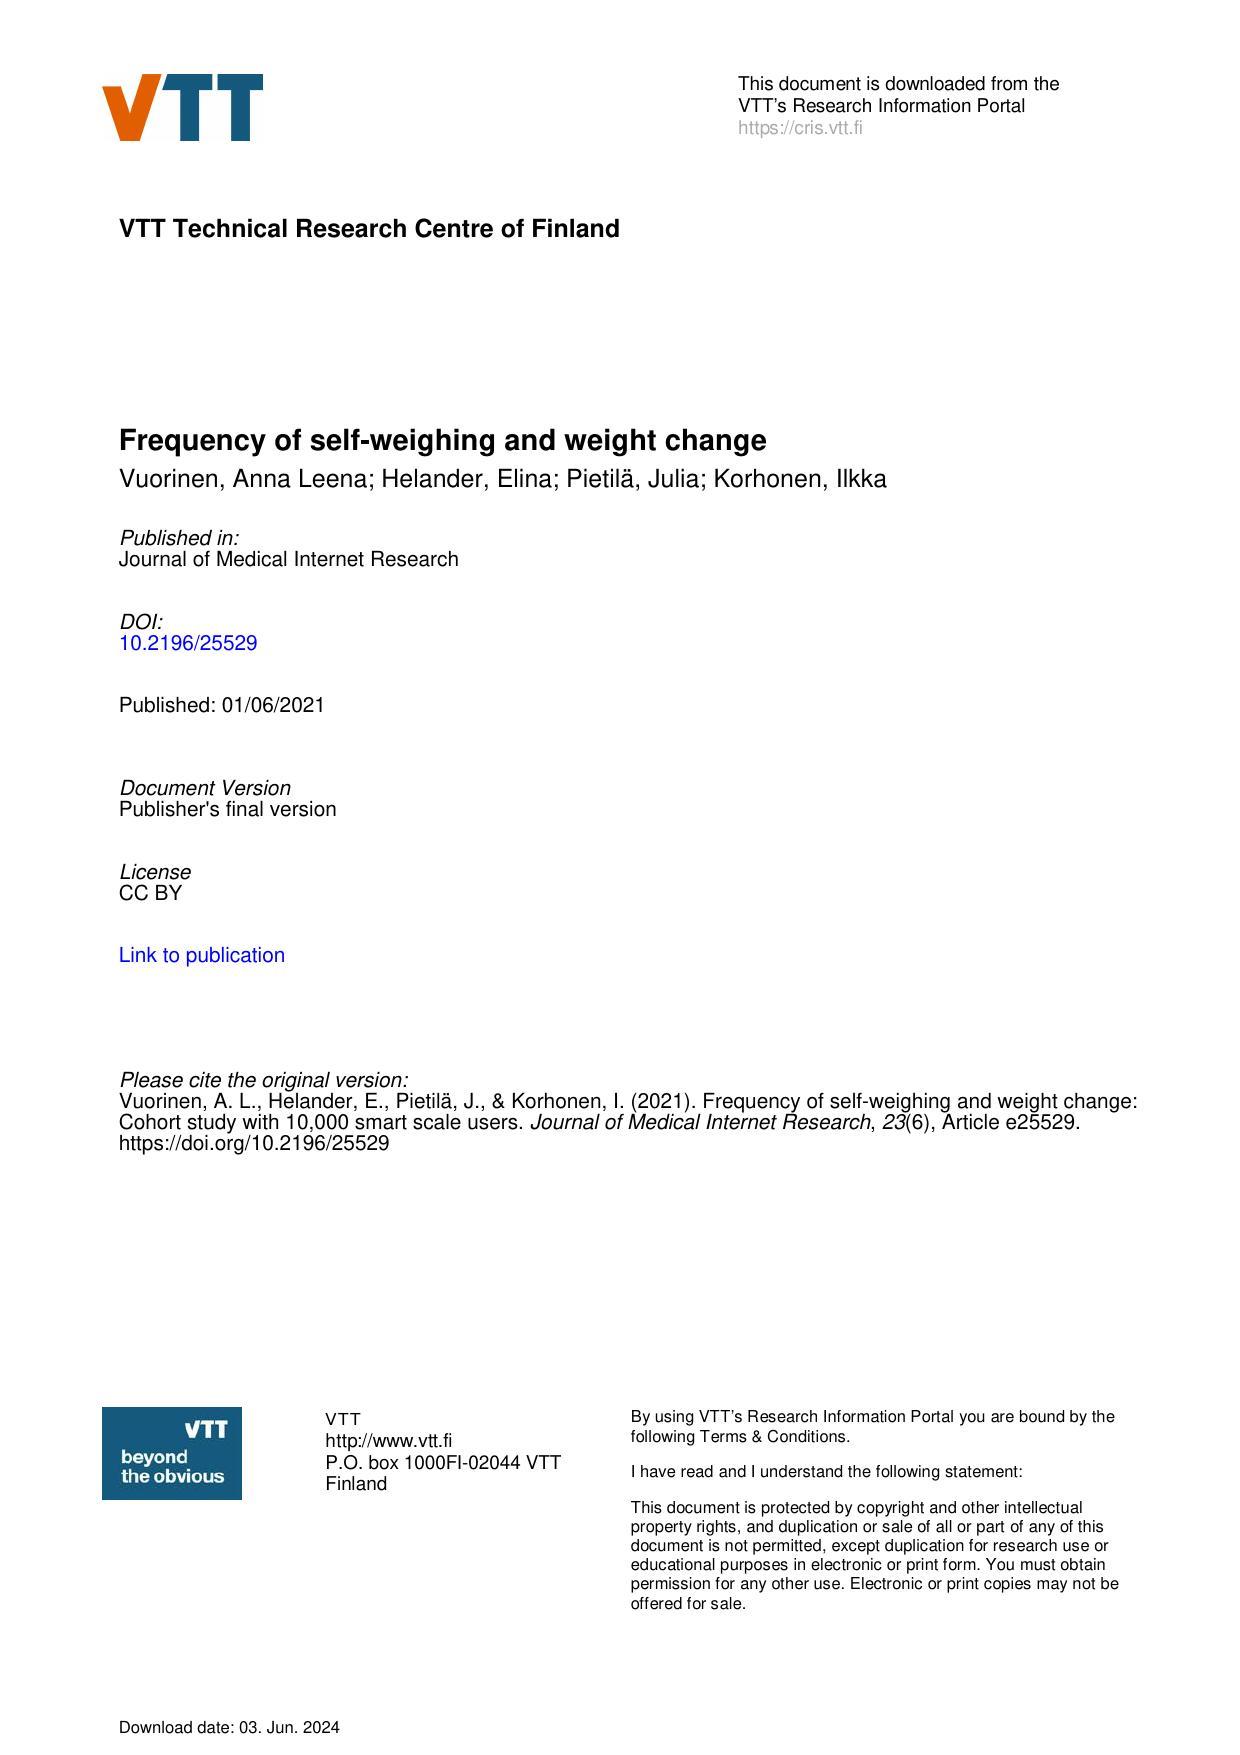 frequency-of-self-weighing-and-weight-change-cohort-study-with-10000-smart-scale-users.pdf